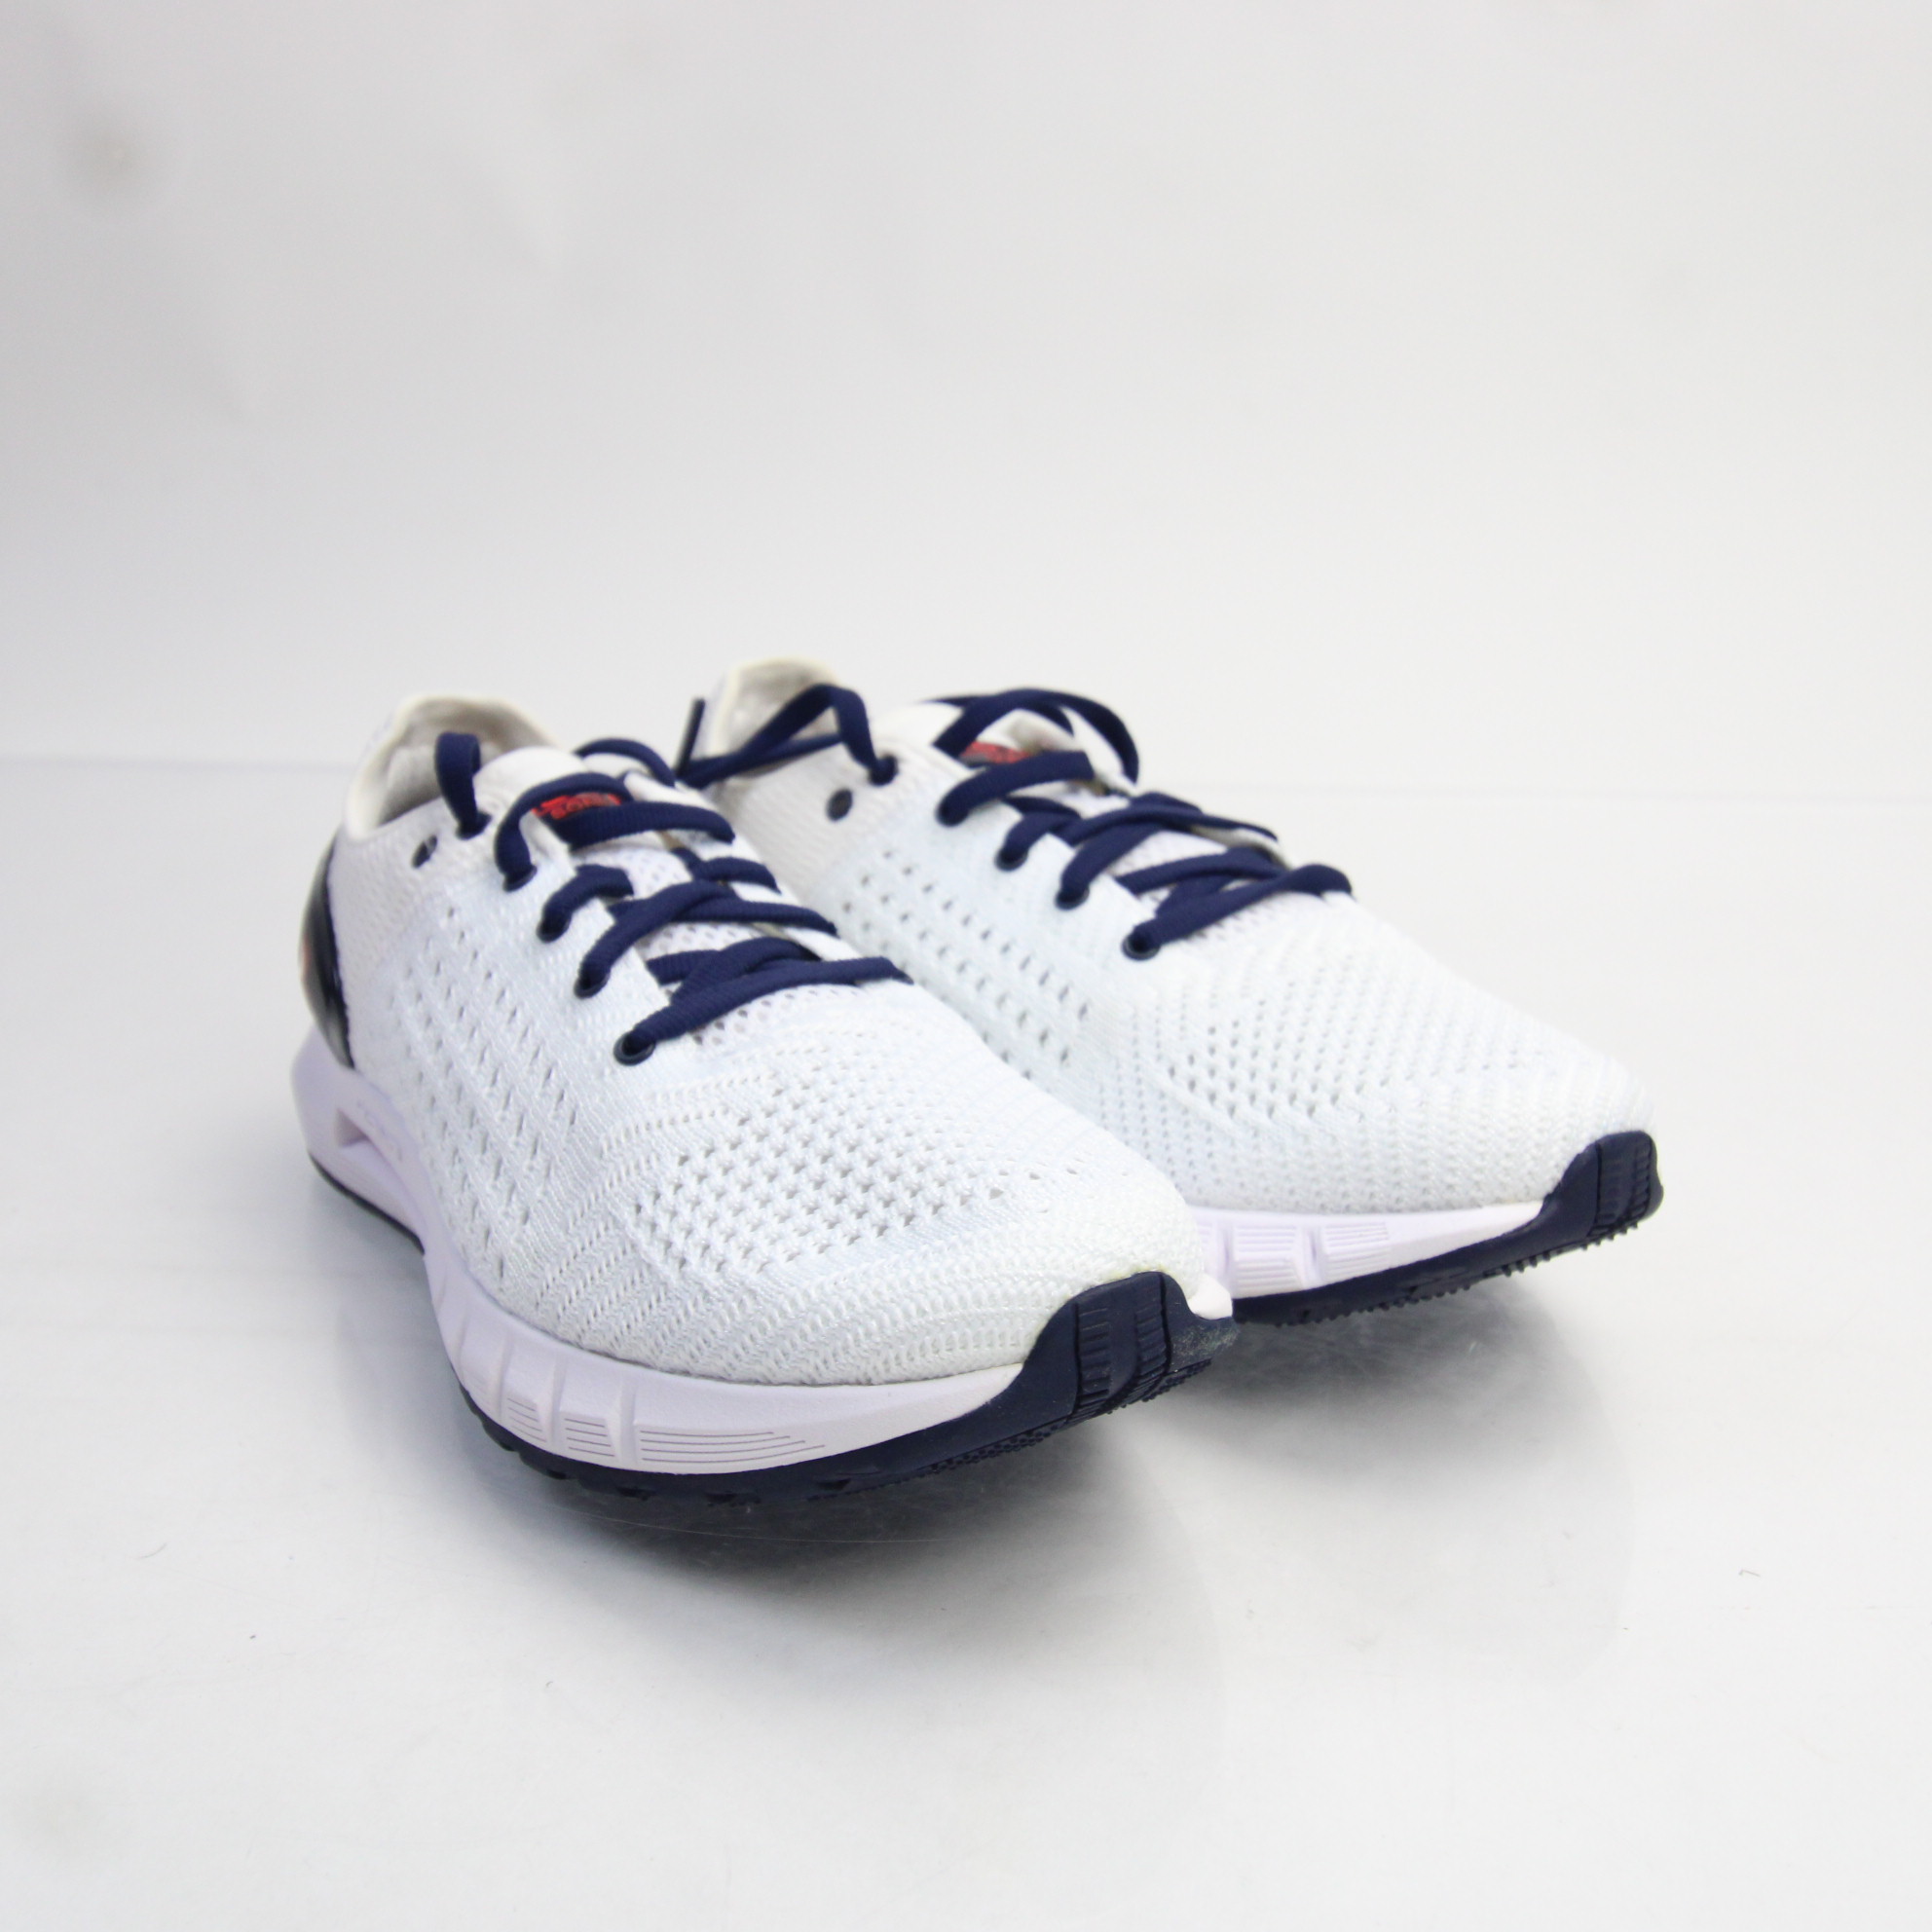 Under Armour HOVR Running Jogging Shoes White/Navy New without | eBay